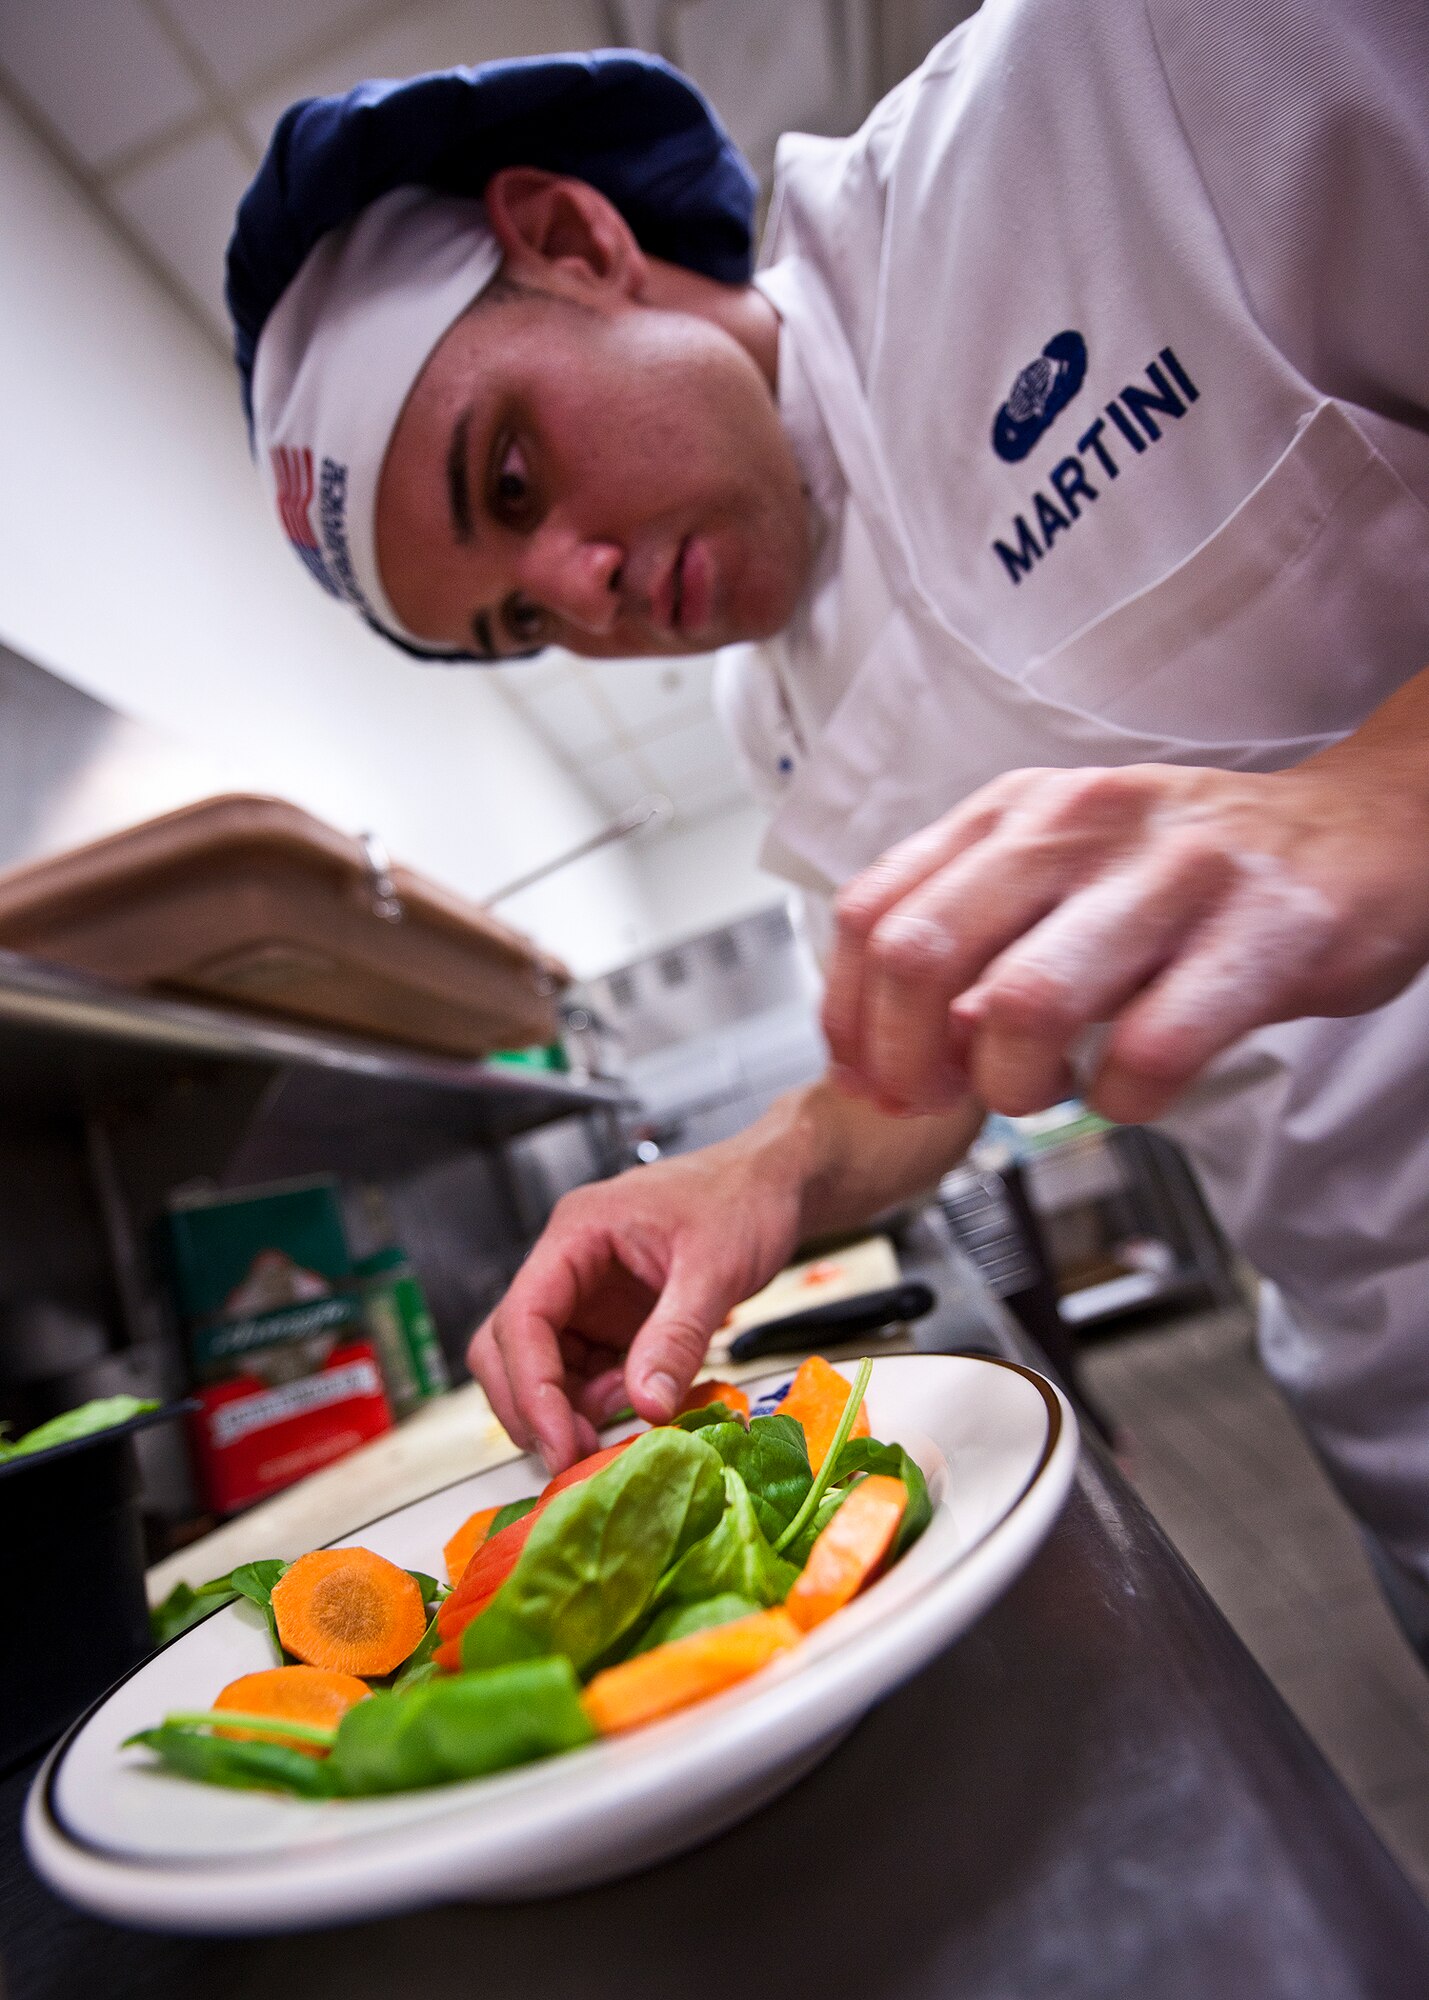 Airman 1st Class Giancarlo Martini arranges his salad plate during his meal preparation for the base’s first “Chopped” cooking competition July 24 at Eglin.  Five Airmen from the 96th Force Support Squadron had an hour to cook a meal with three secret ingredients.  Martini placed second in the competition.  (U.S. Air Force photo/Samuel King Jr.)